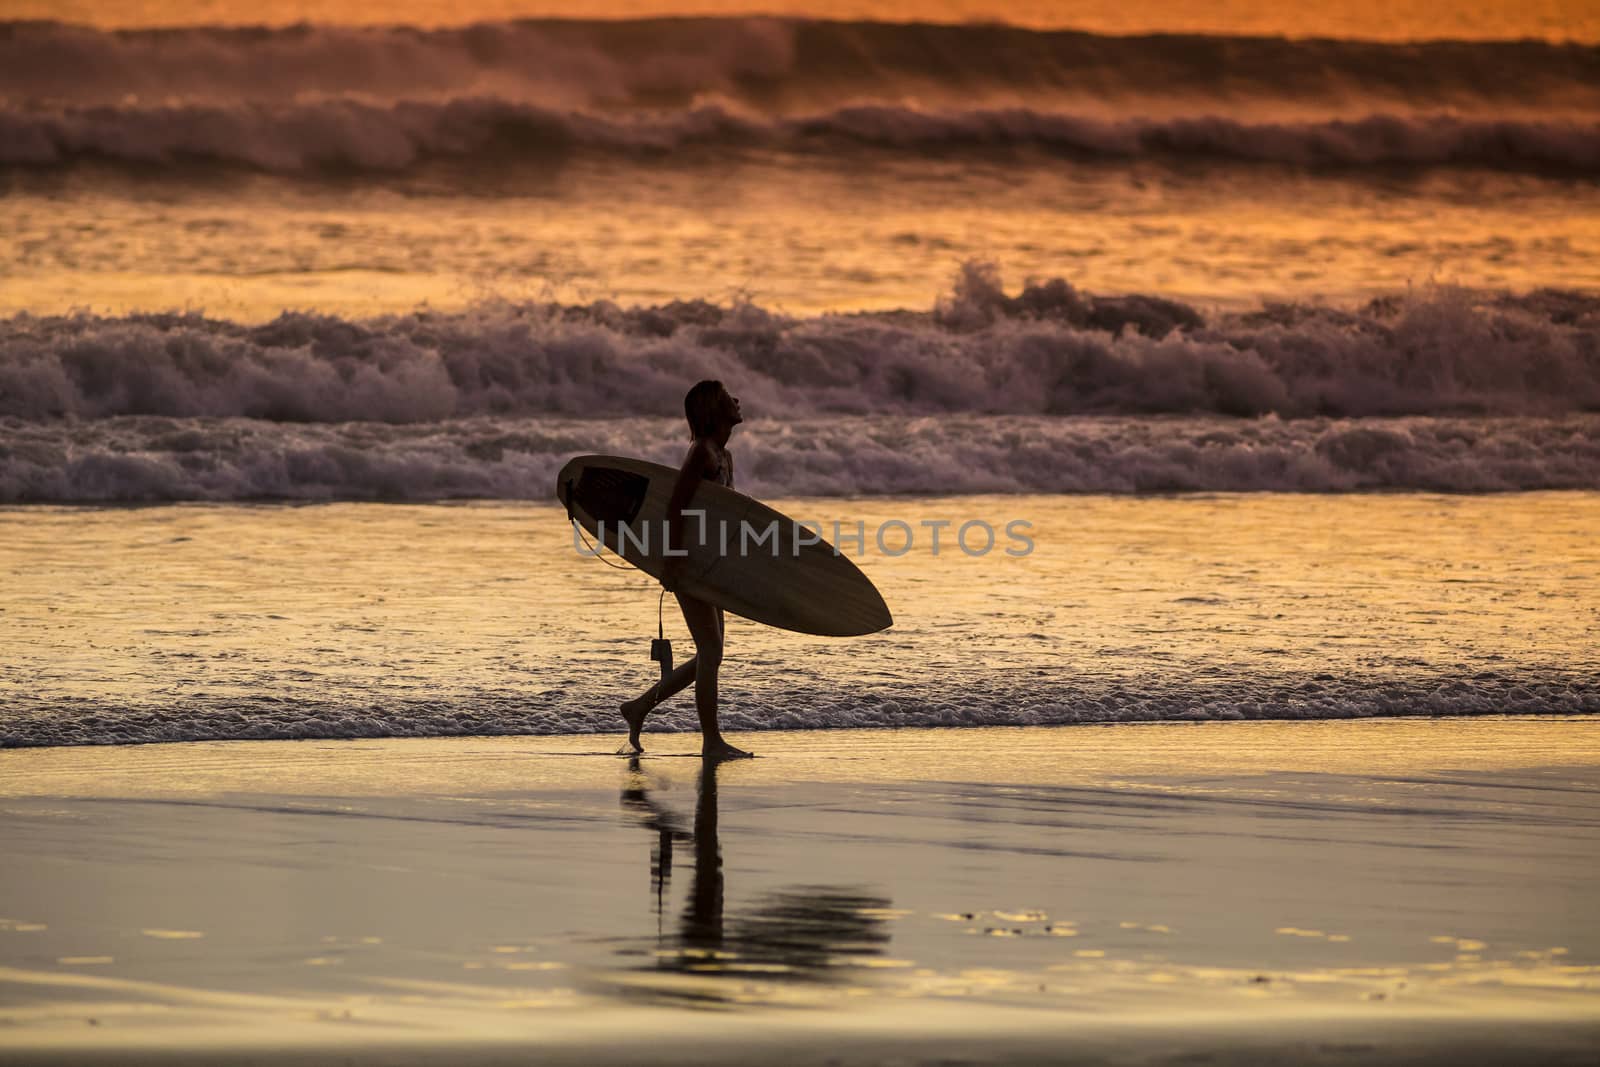 Surfer on the Beach at Sunset Tme, Bali, Indonesia